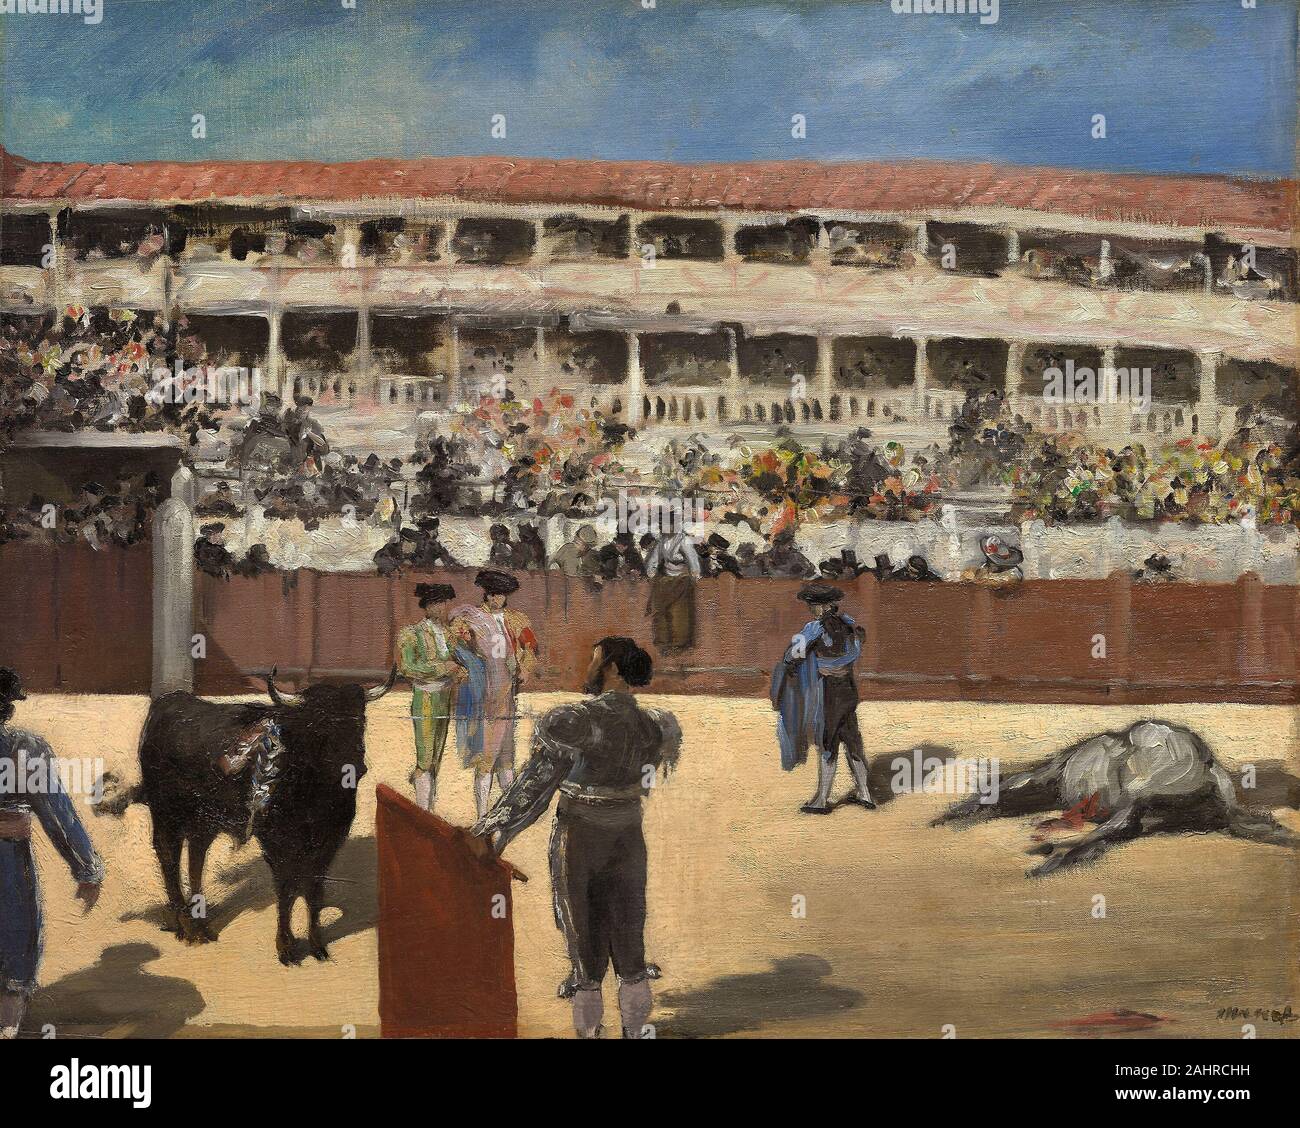 Édouard Manet. Bullfight. 1865–1866. France. Oil on canvas Édouard Manet’s trip to Spain in the fall of 1865 lasted only about 10 days, though it had a profound impact on him. In a letter to his friend the poet Charles Baudelaire, he described a bullfight he attended in Madrid as “one of the finest, most curious and most terrifying sights to be seen.” He made quick sketches there that informed several later canvases, including this one. Here he presented the moment of truth, as bullfighter and bull face one another; a gored horse lies dead or dying on the sand. Stock Photo